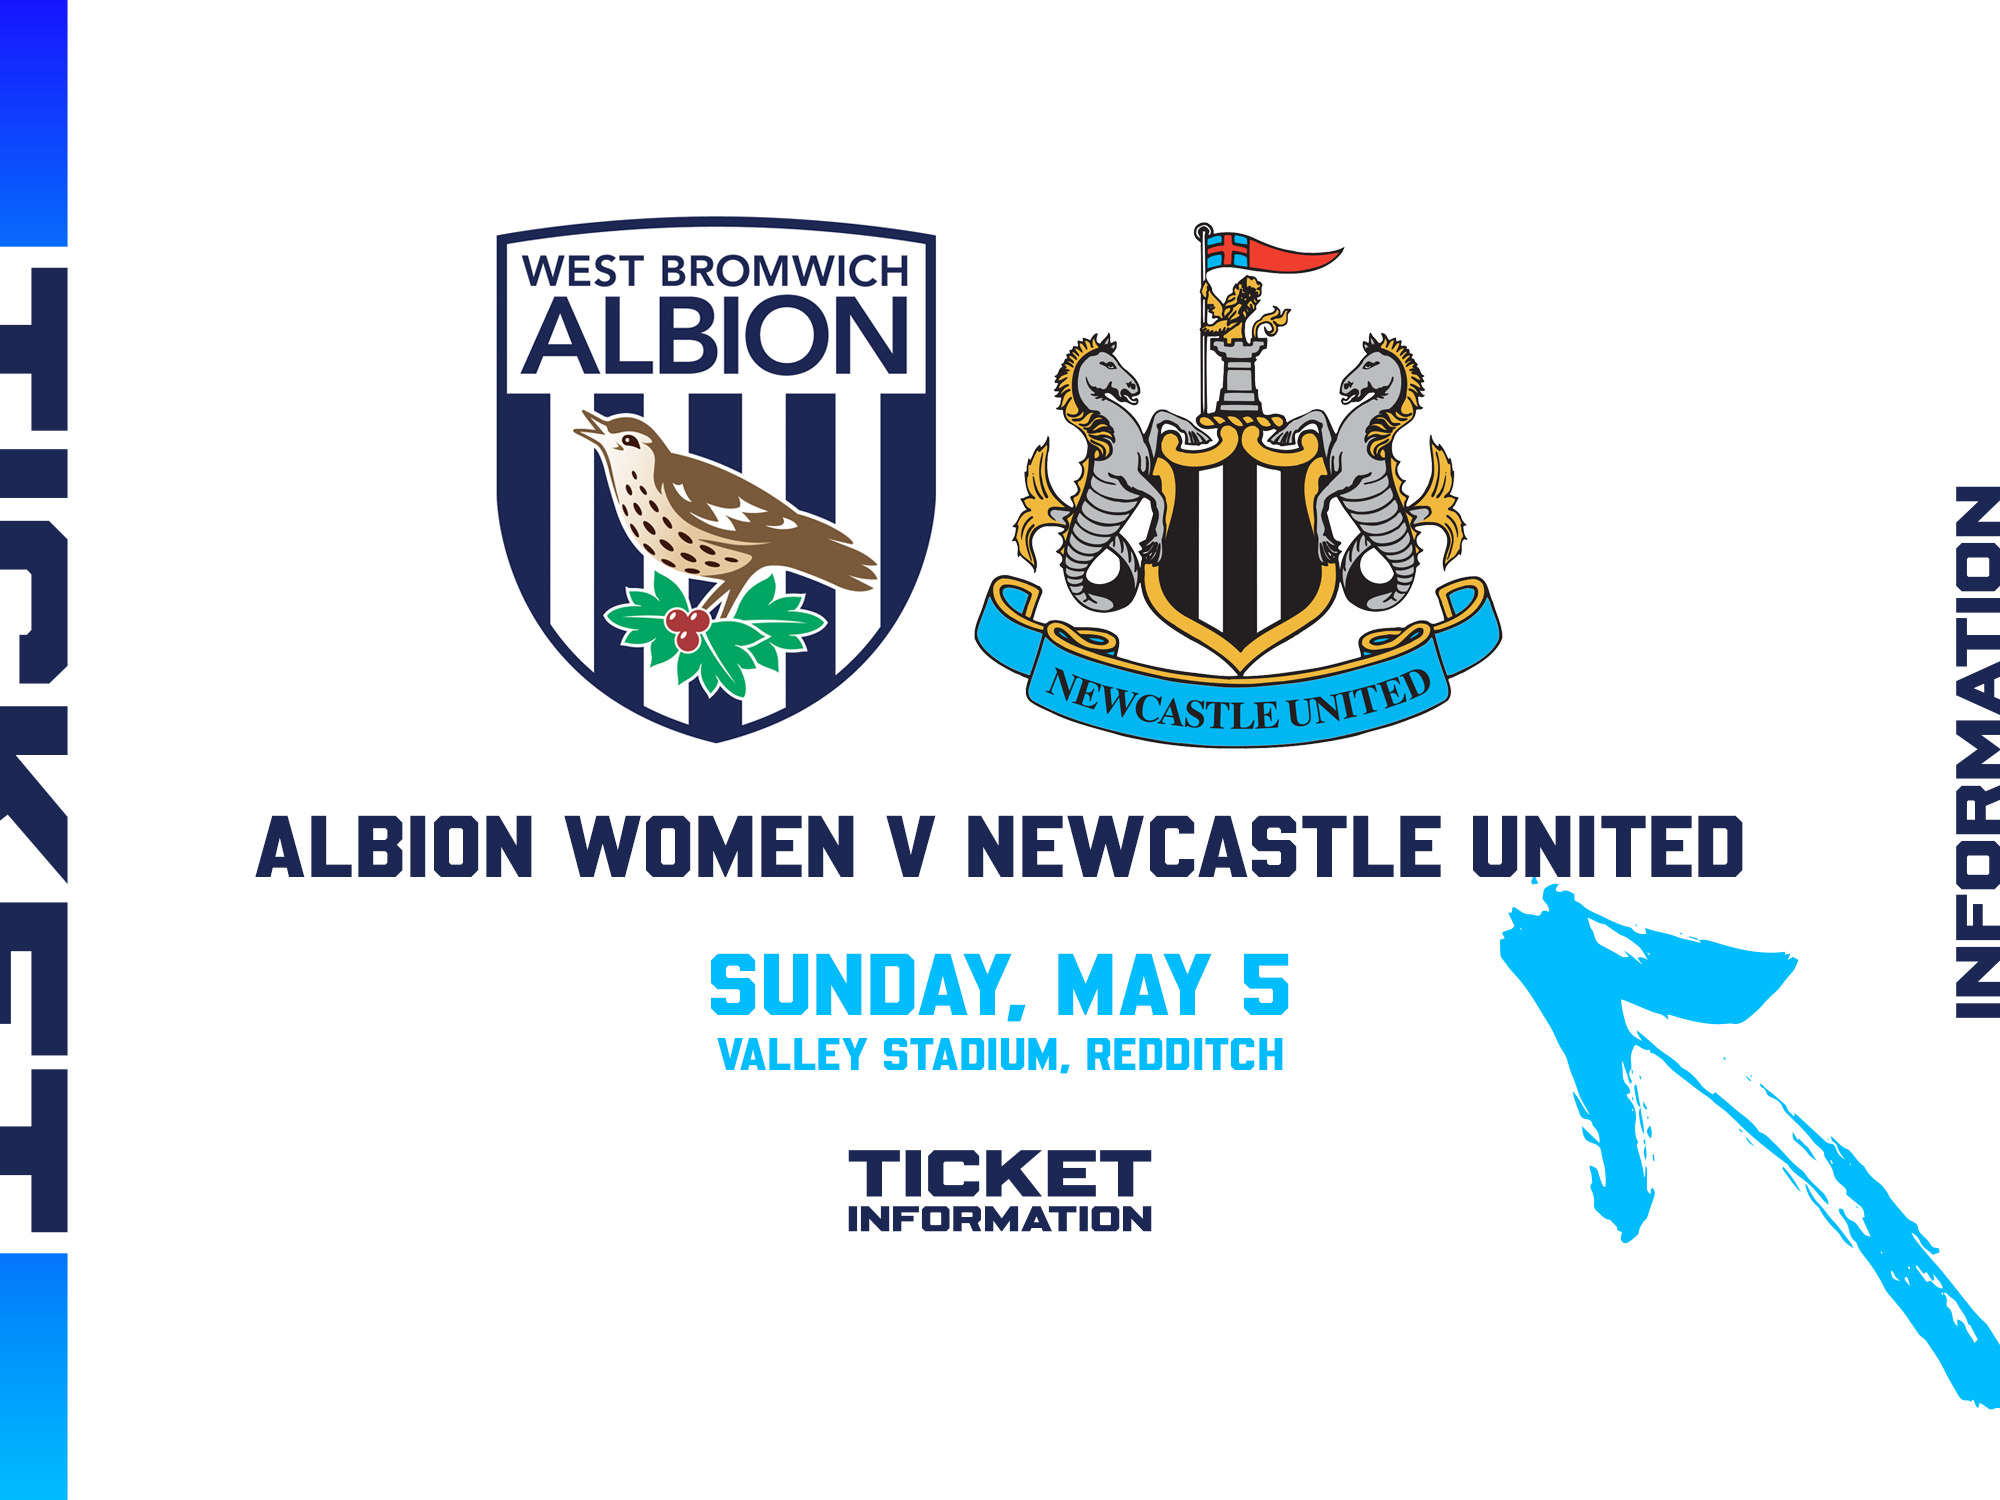 Albion Women ticket graphic v Newcastle United at the Valley Stadium on Sunday, May 5